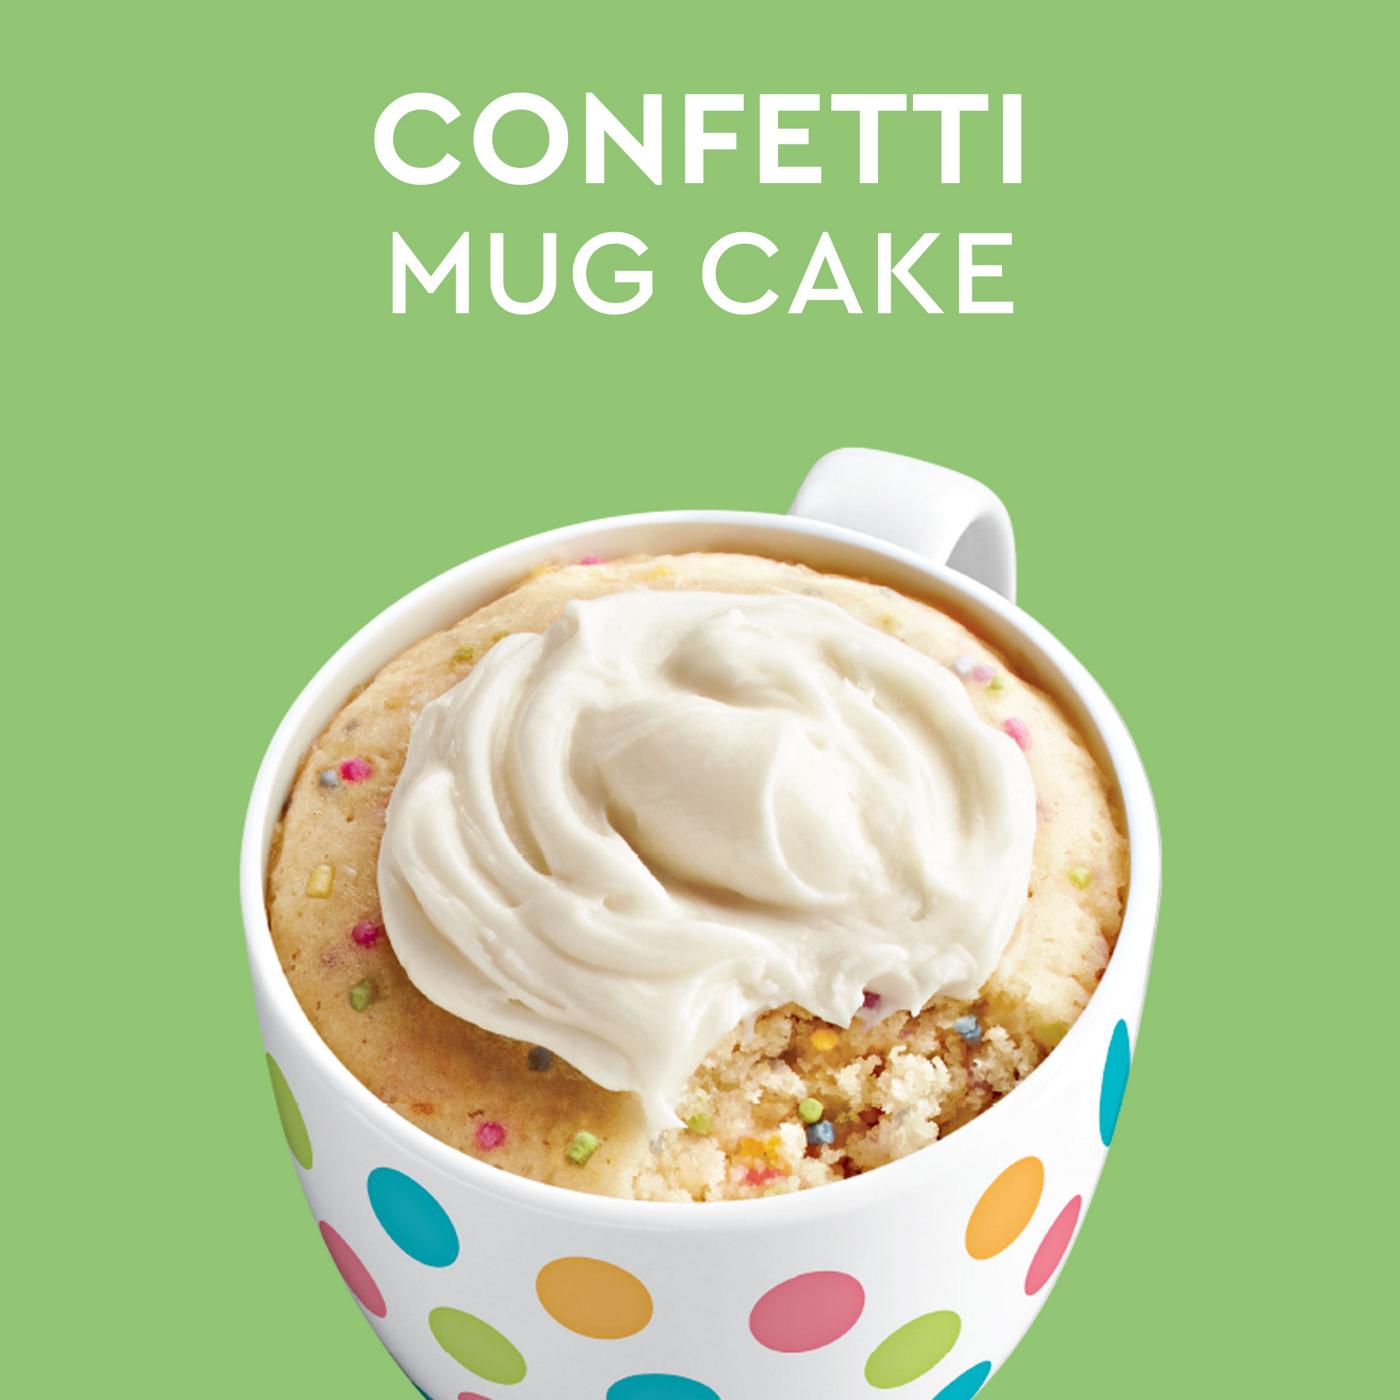 Duncan Hines Perfect Size for 1 Mug Cakes Confetti Cake Mix with Vanilla Frosting; image 5 of 6